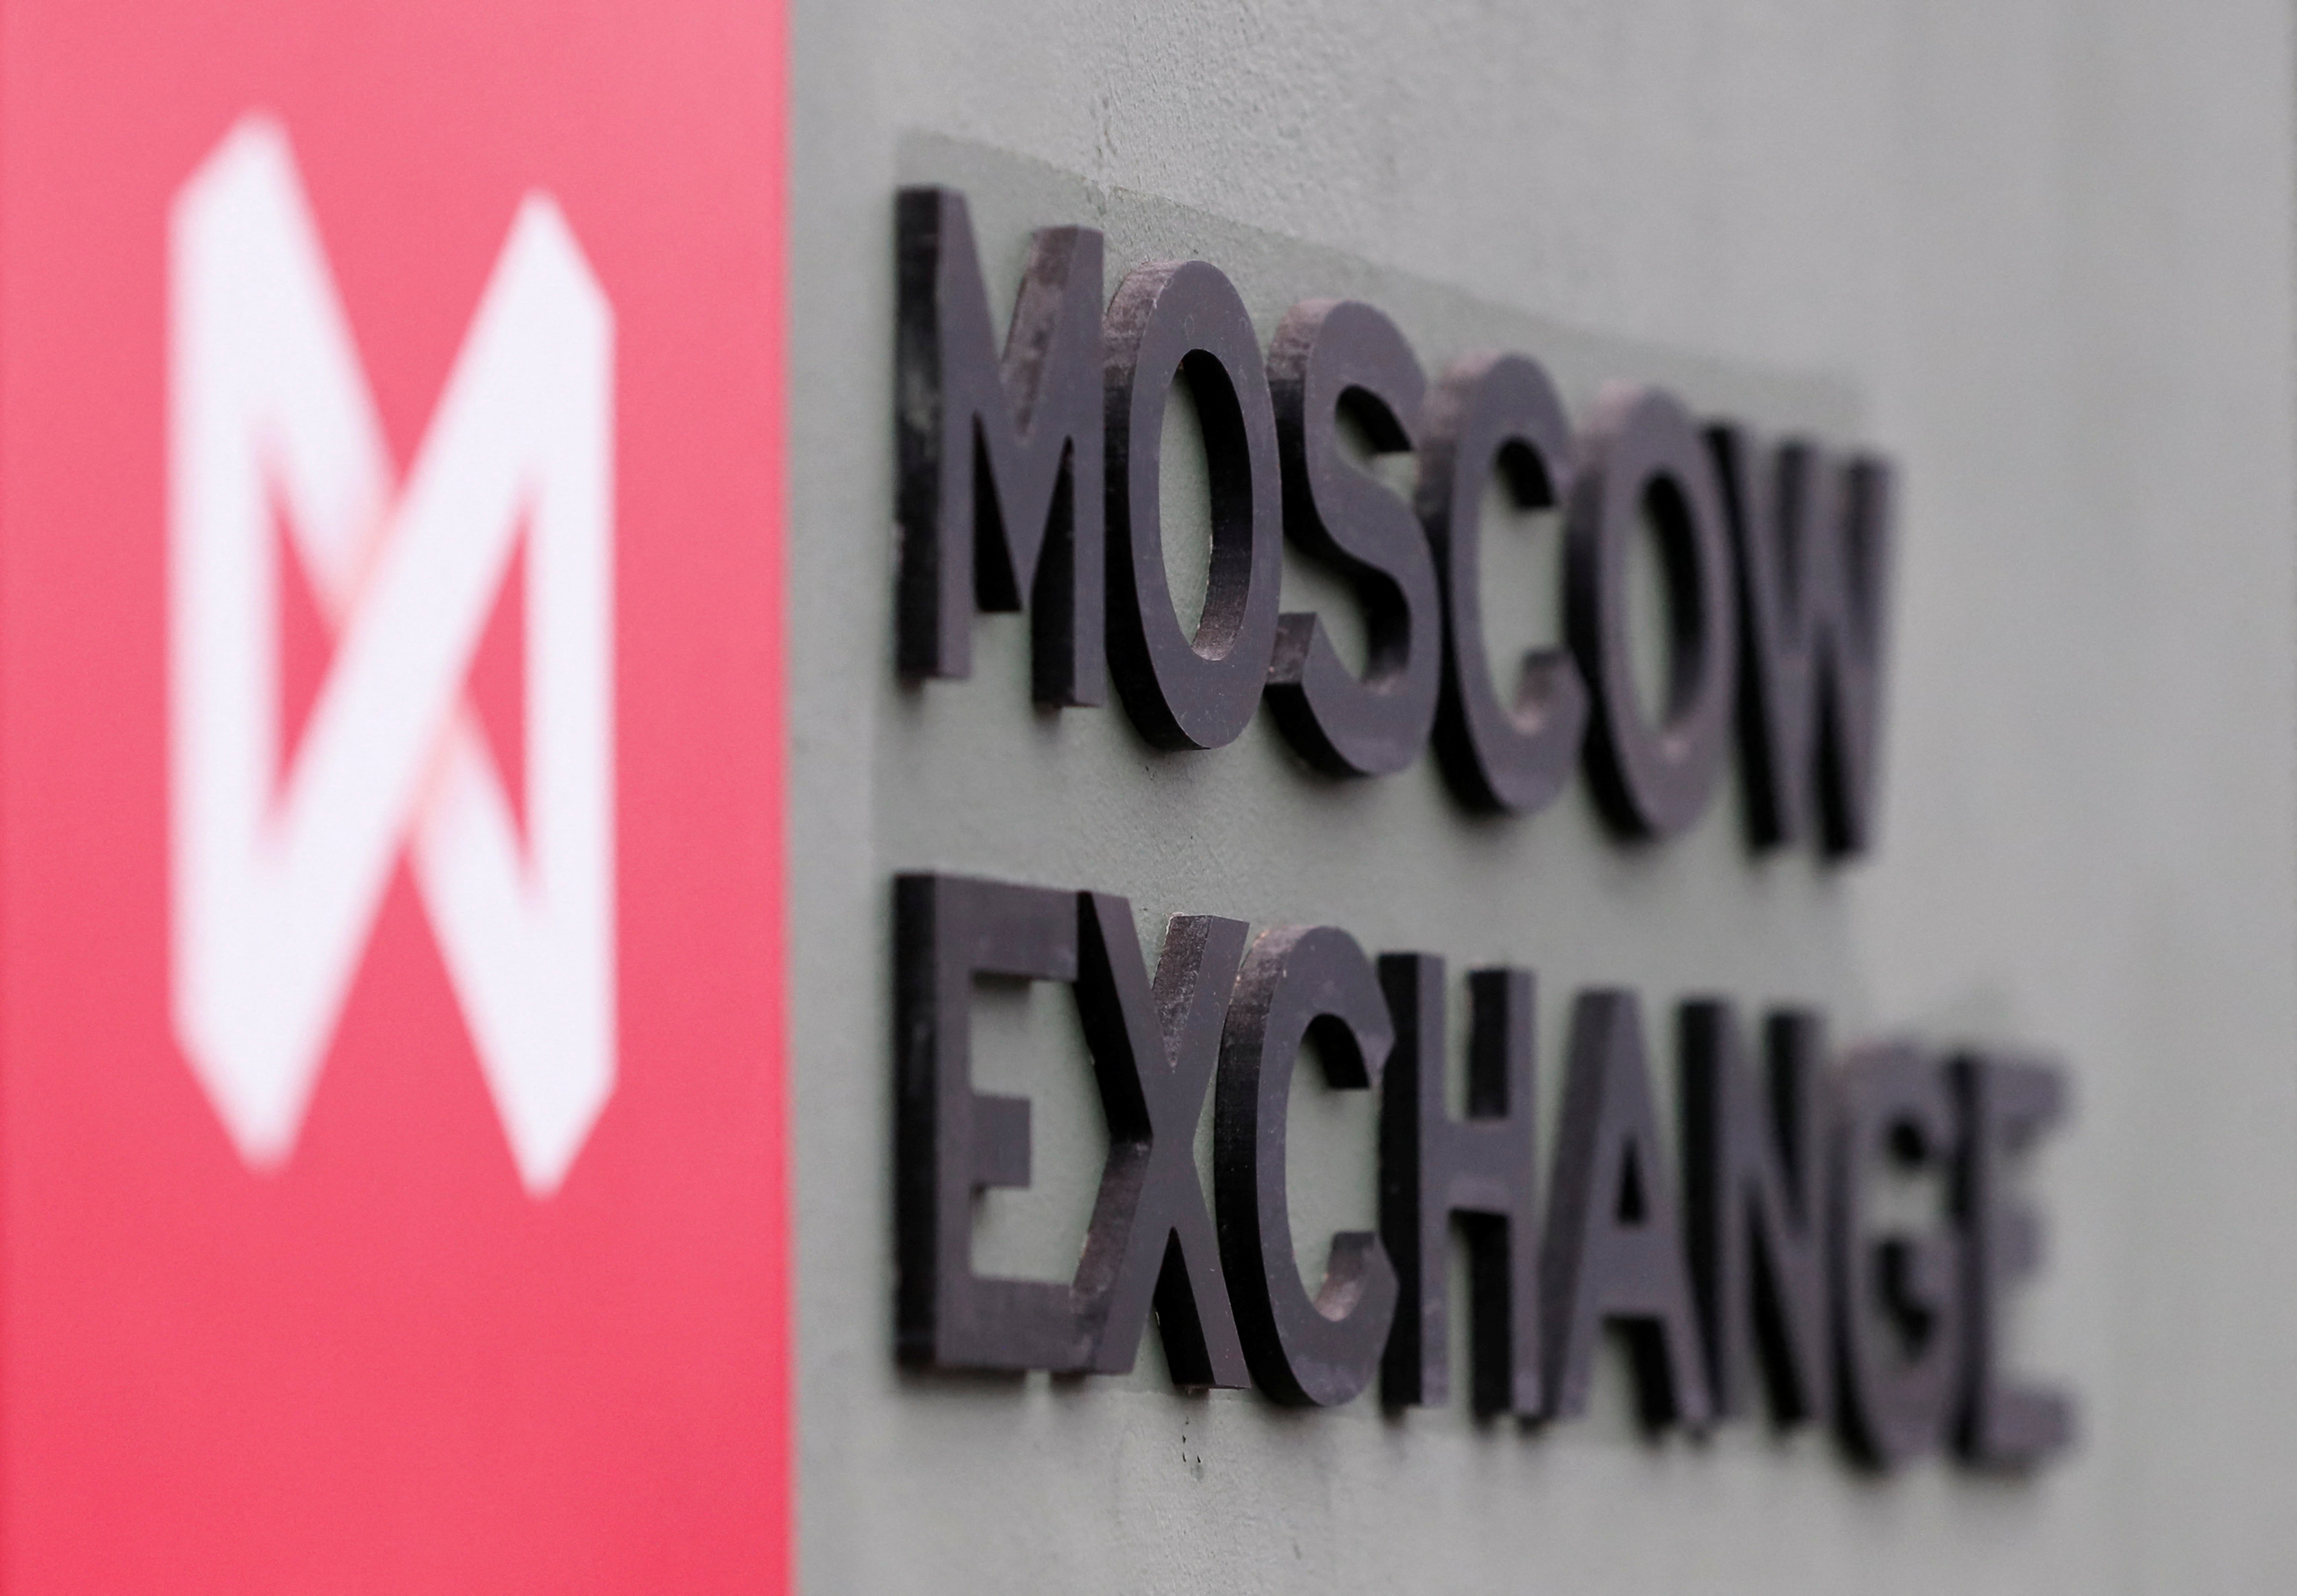 A board with the logo of the Moscow Exchange is on display in its office in Moscow